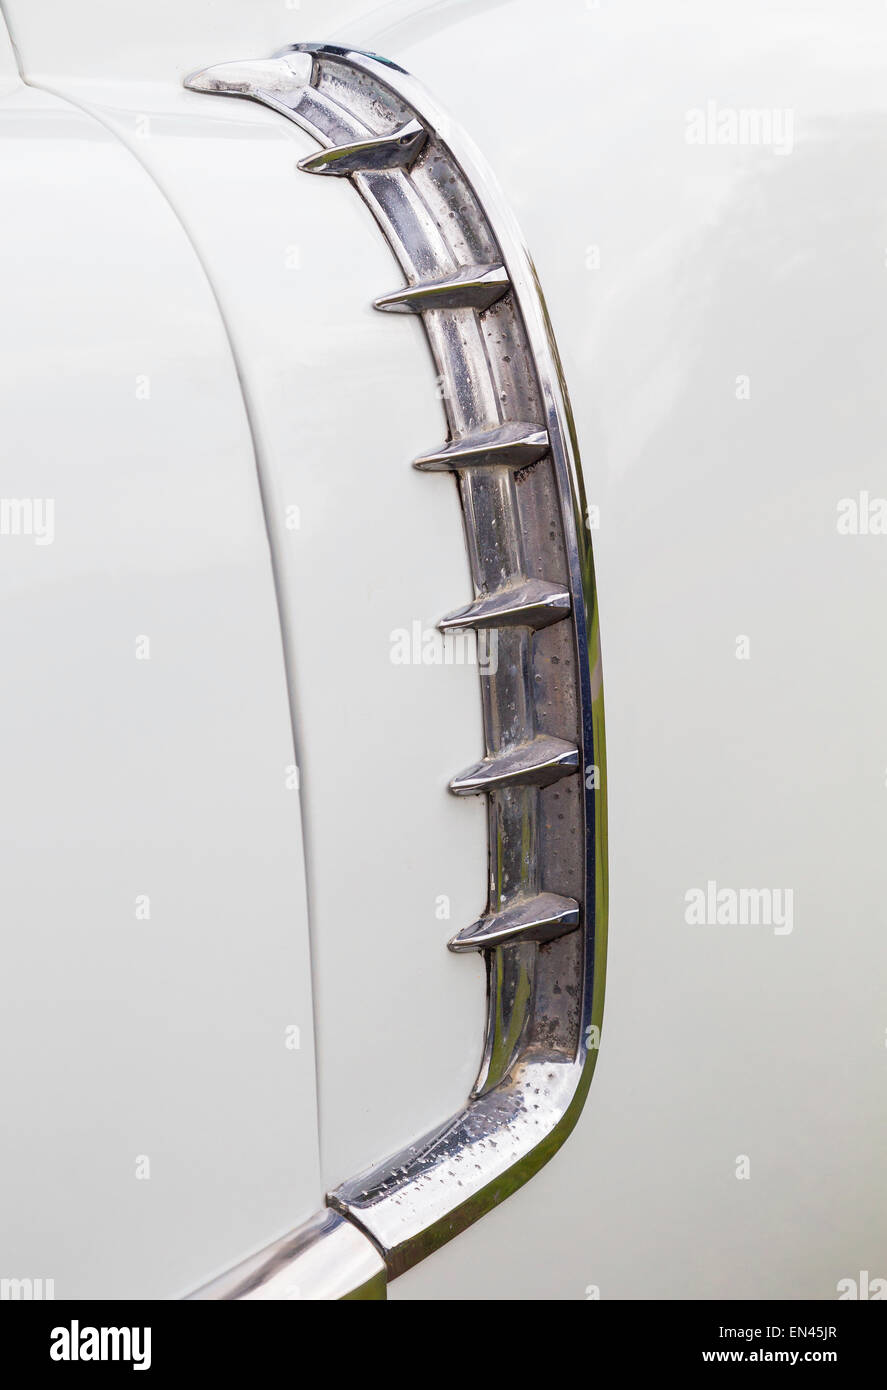 A detail of the left side of a white 1956 Cadillac Coupe De Ville. Stock Photo